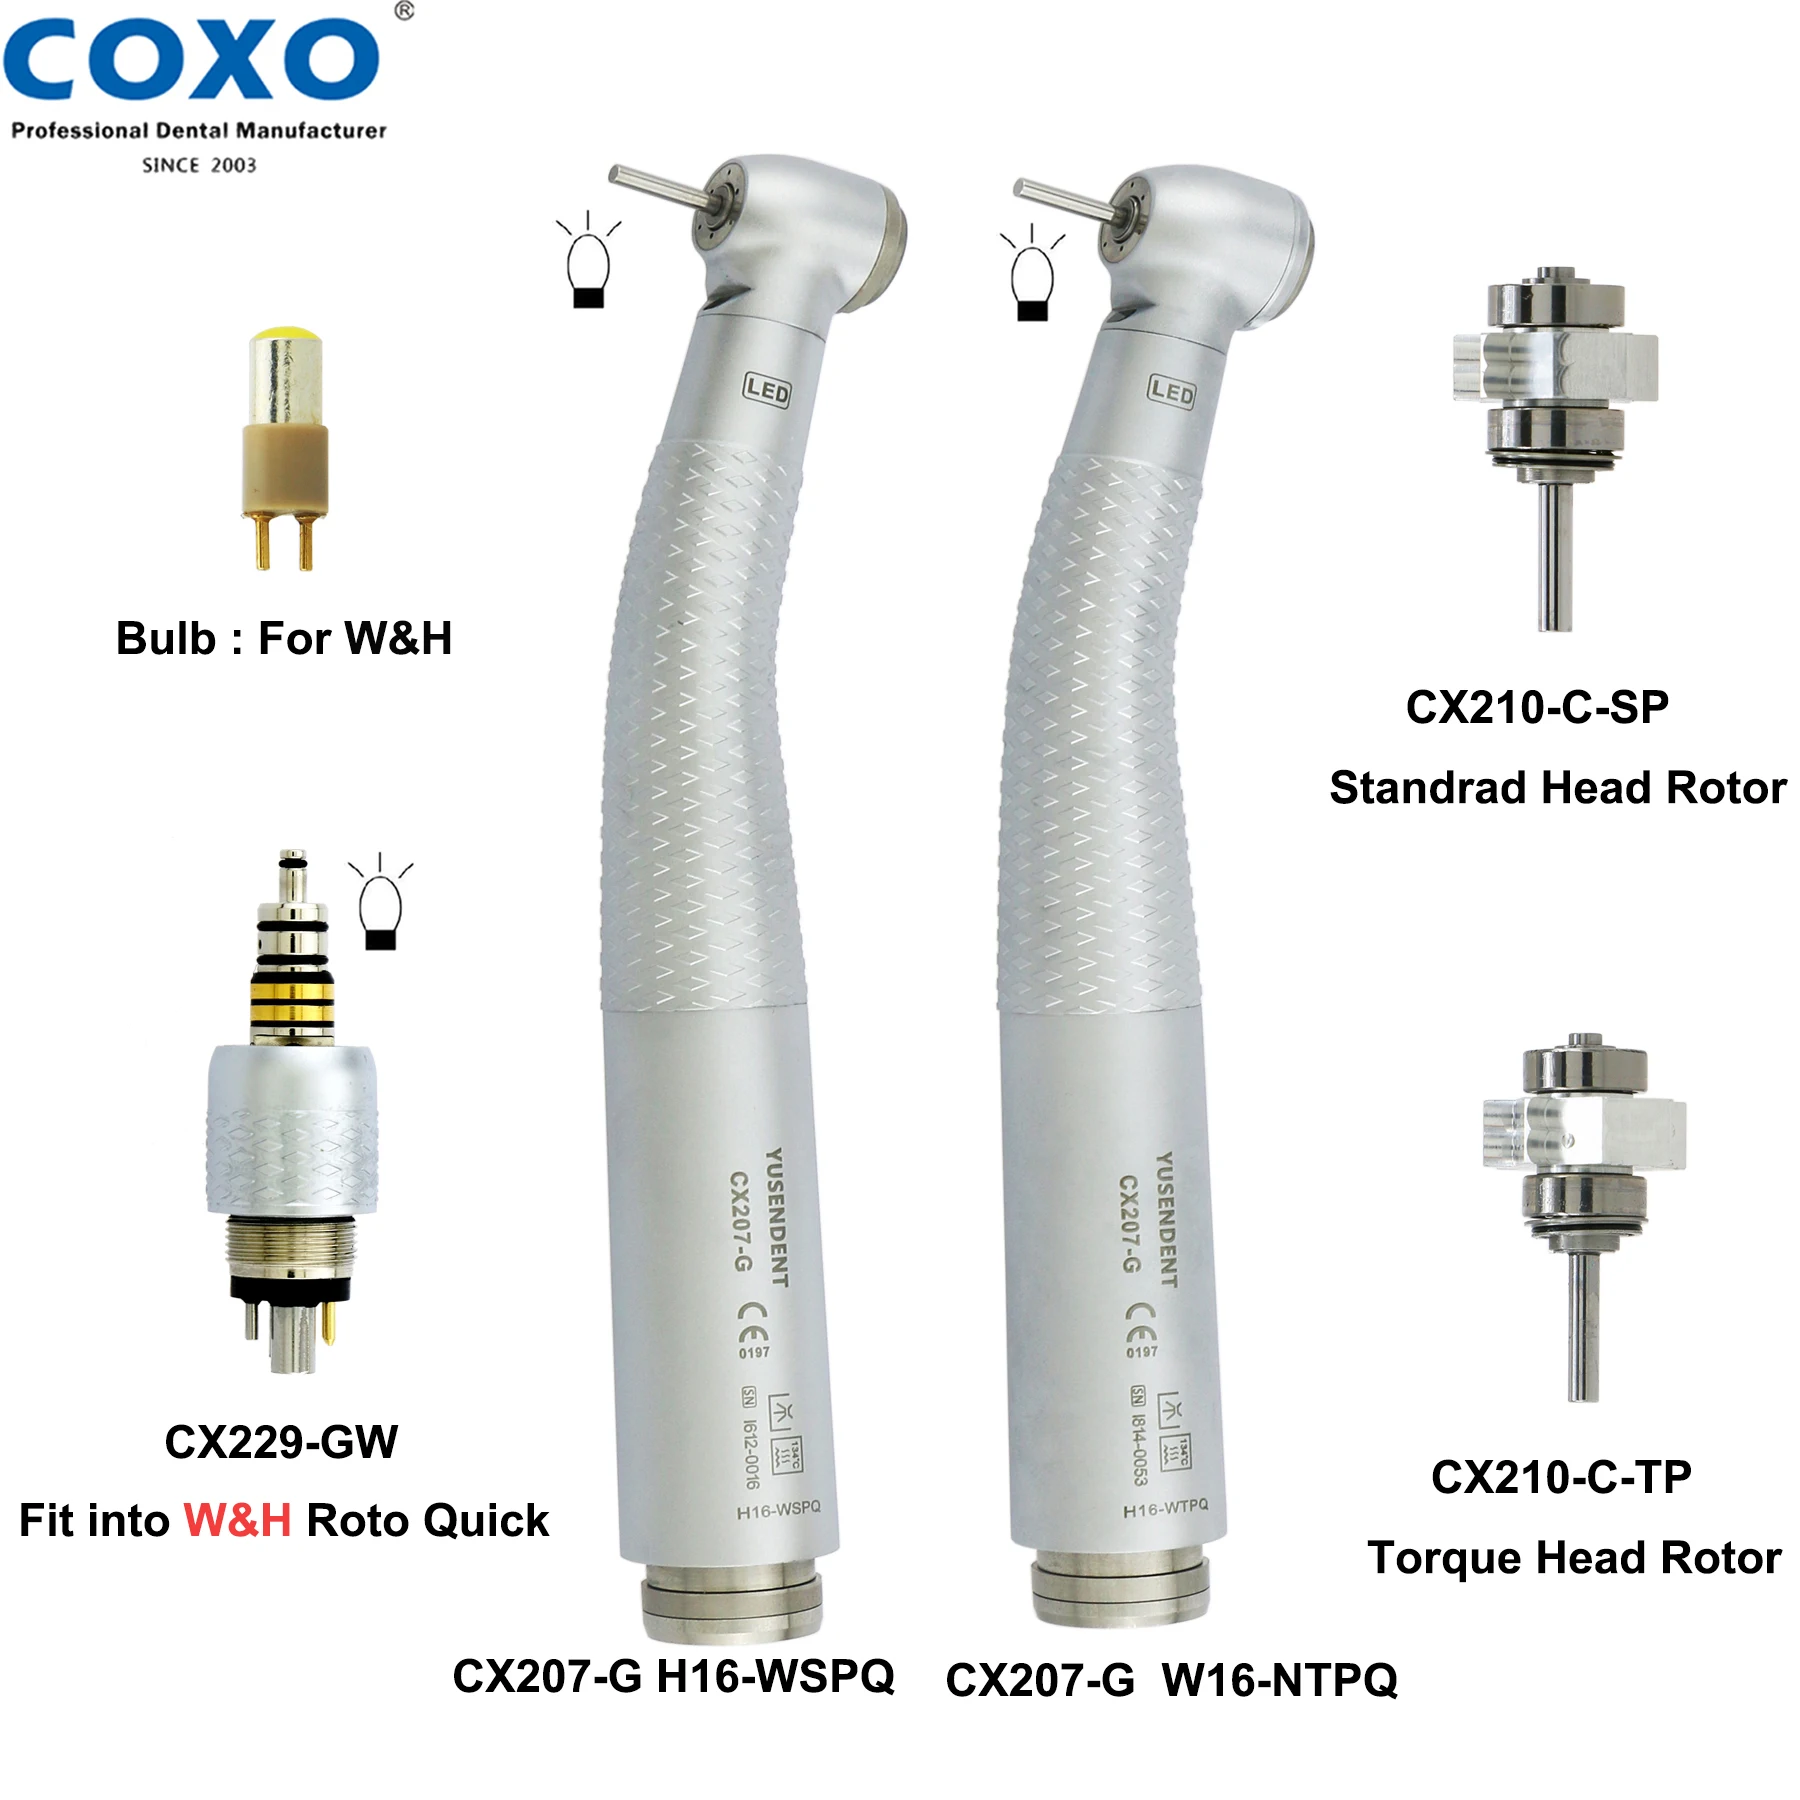 COXO Dental Handpiece Fiber Optic High Speed Handpiece Air Turbine 6 Holes LED Coupler Coupling 6 Pin Fit Into W&H Roto Quick